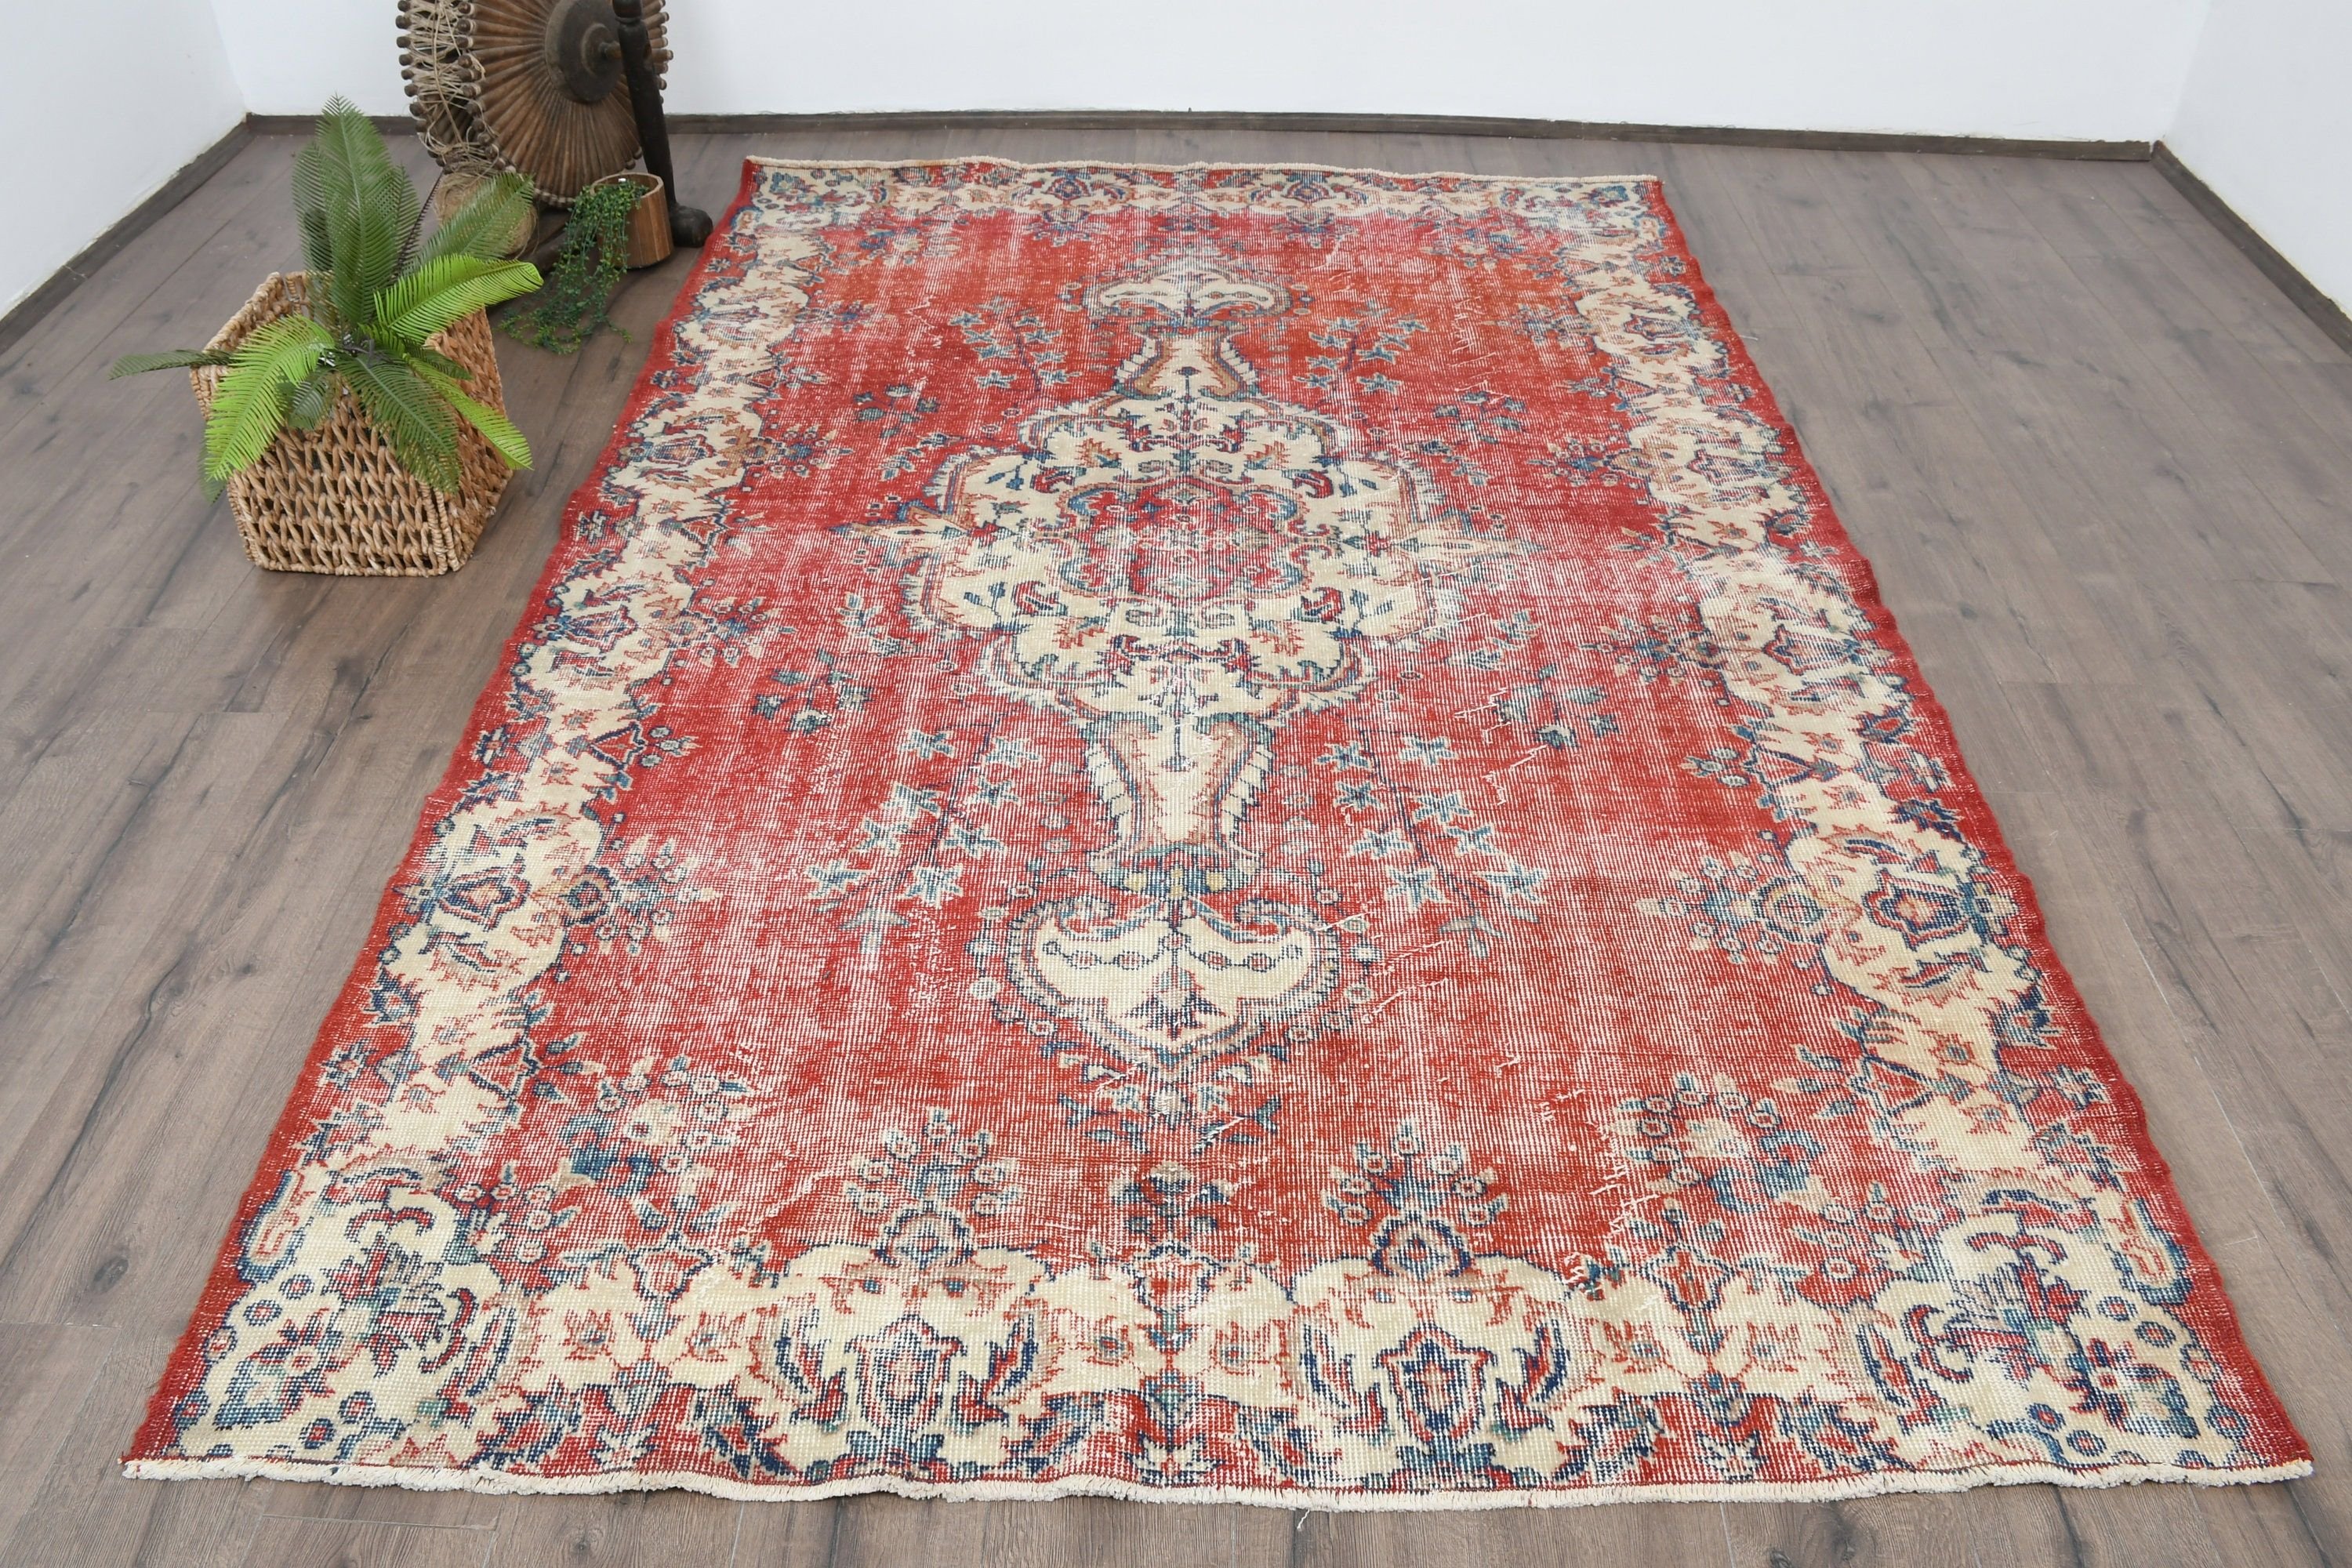 Red Moroccan Rugs, Turkish Rugs, Rugs for Salon, Living Room Rug, Vintage Rugs, Home Decor Rug, 5.8x9.1 ft Large Rugs, Old Rug, Bedroom Rug